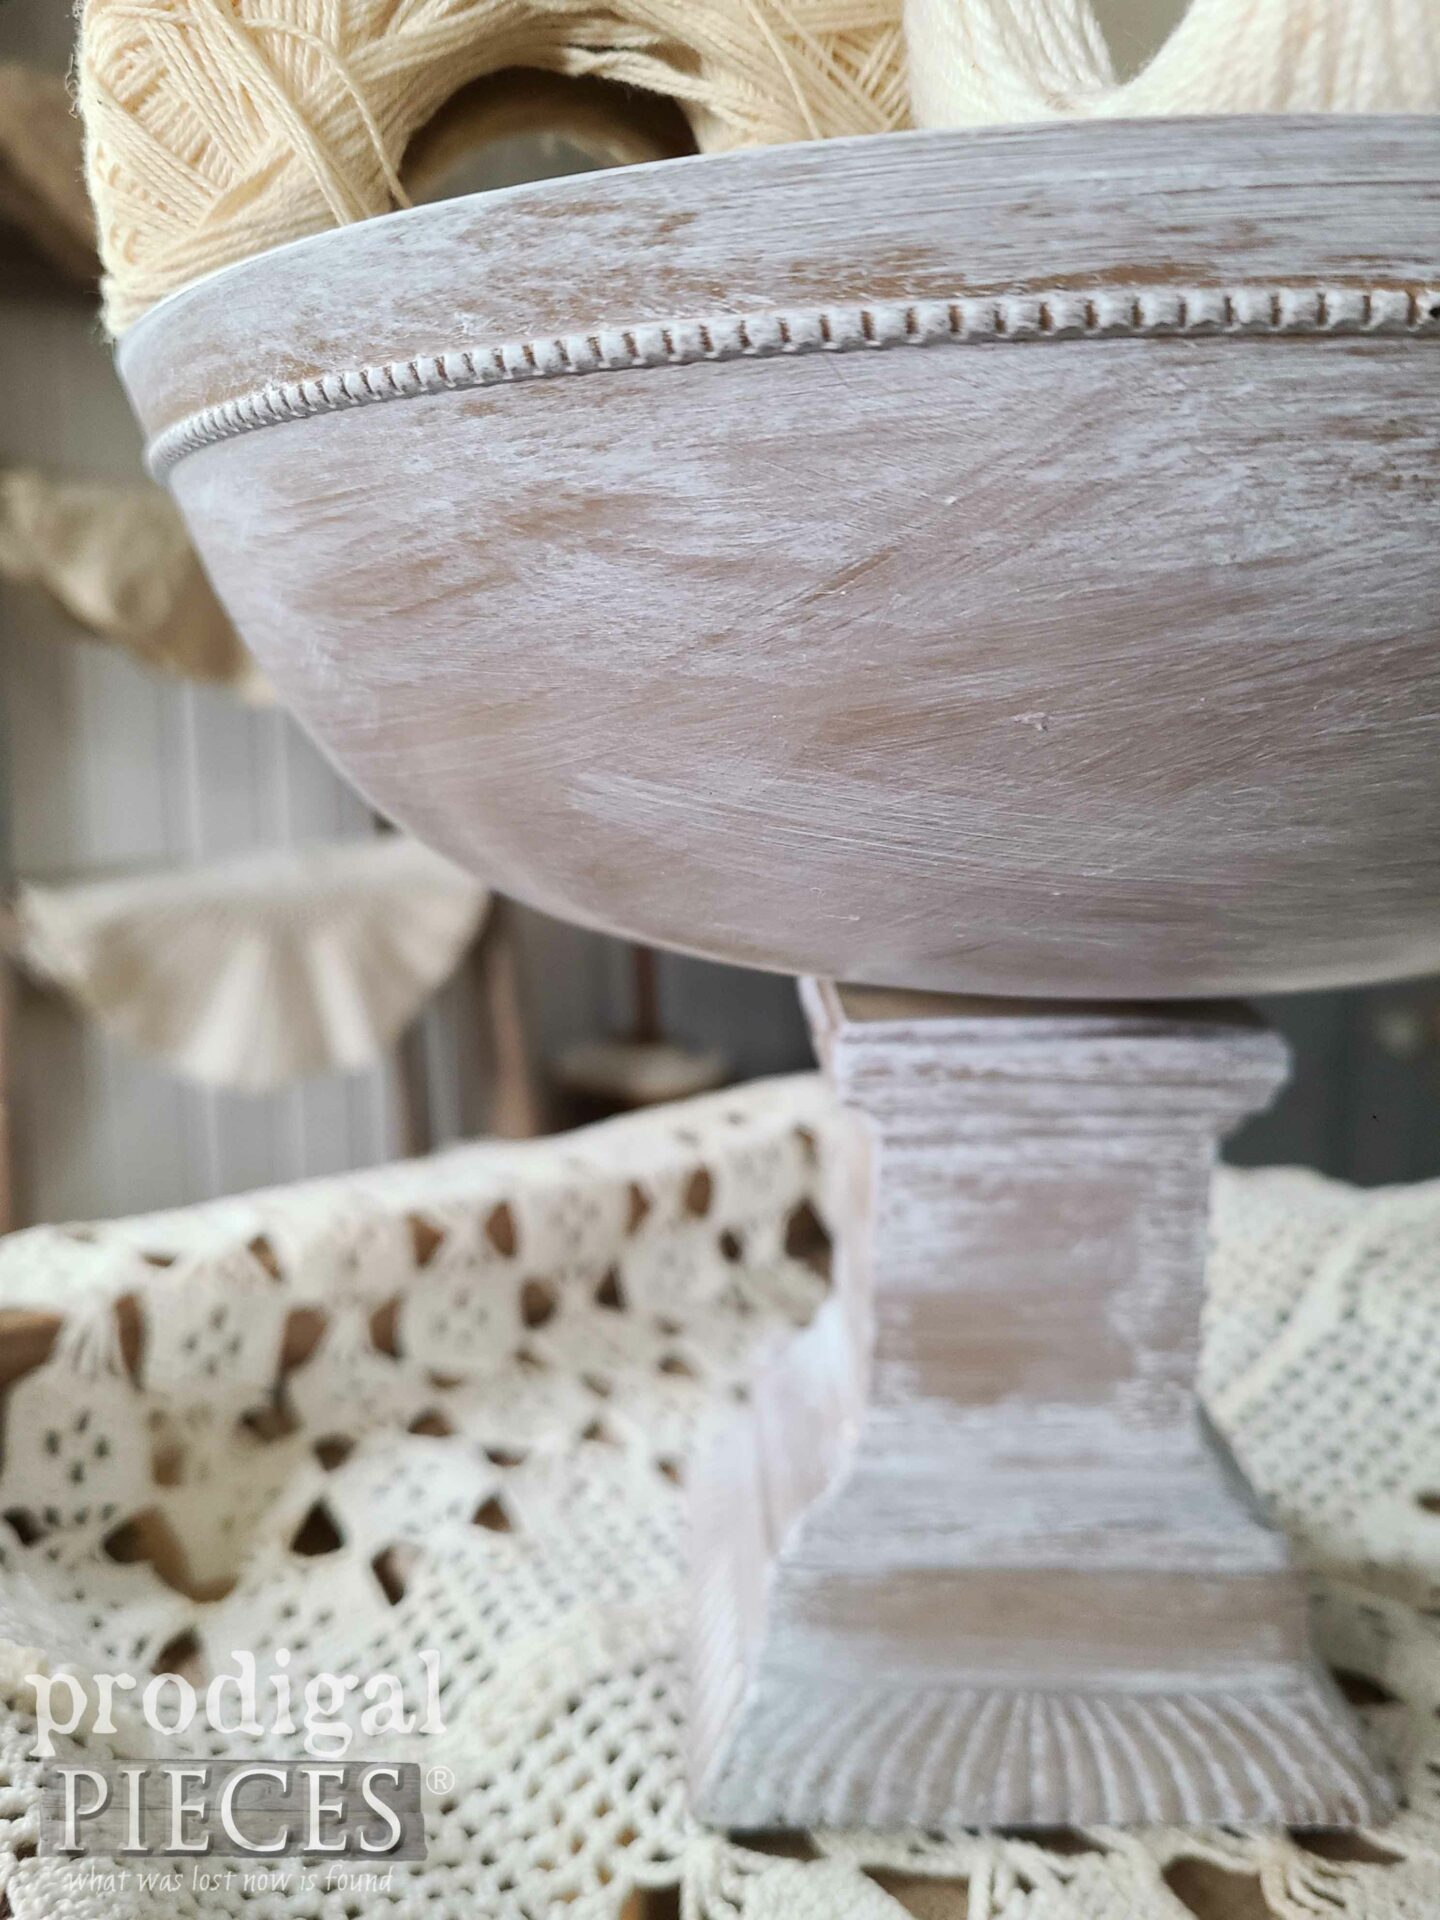 Decorated Farmhouse Compote Bowl for Thrifty Update by Larissa of Prodigal Pieces | prodigalpieces.com #prodigalpieces #farmhouse #homedecor